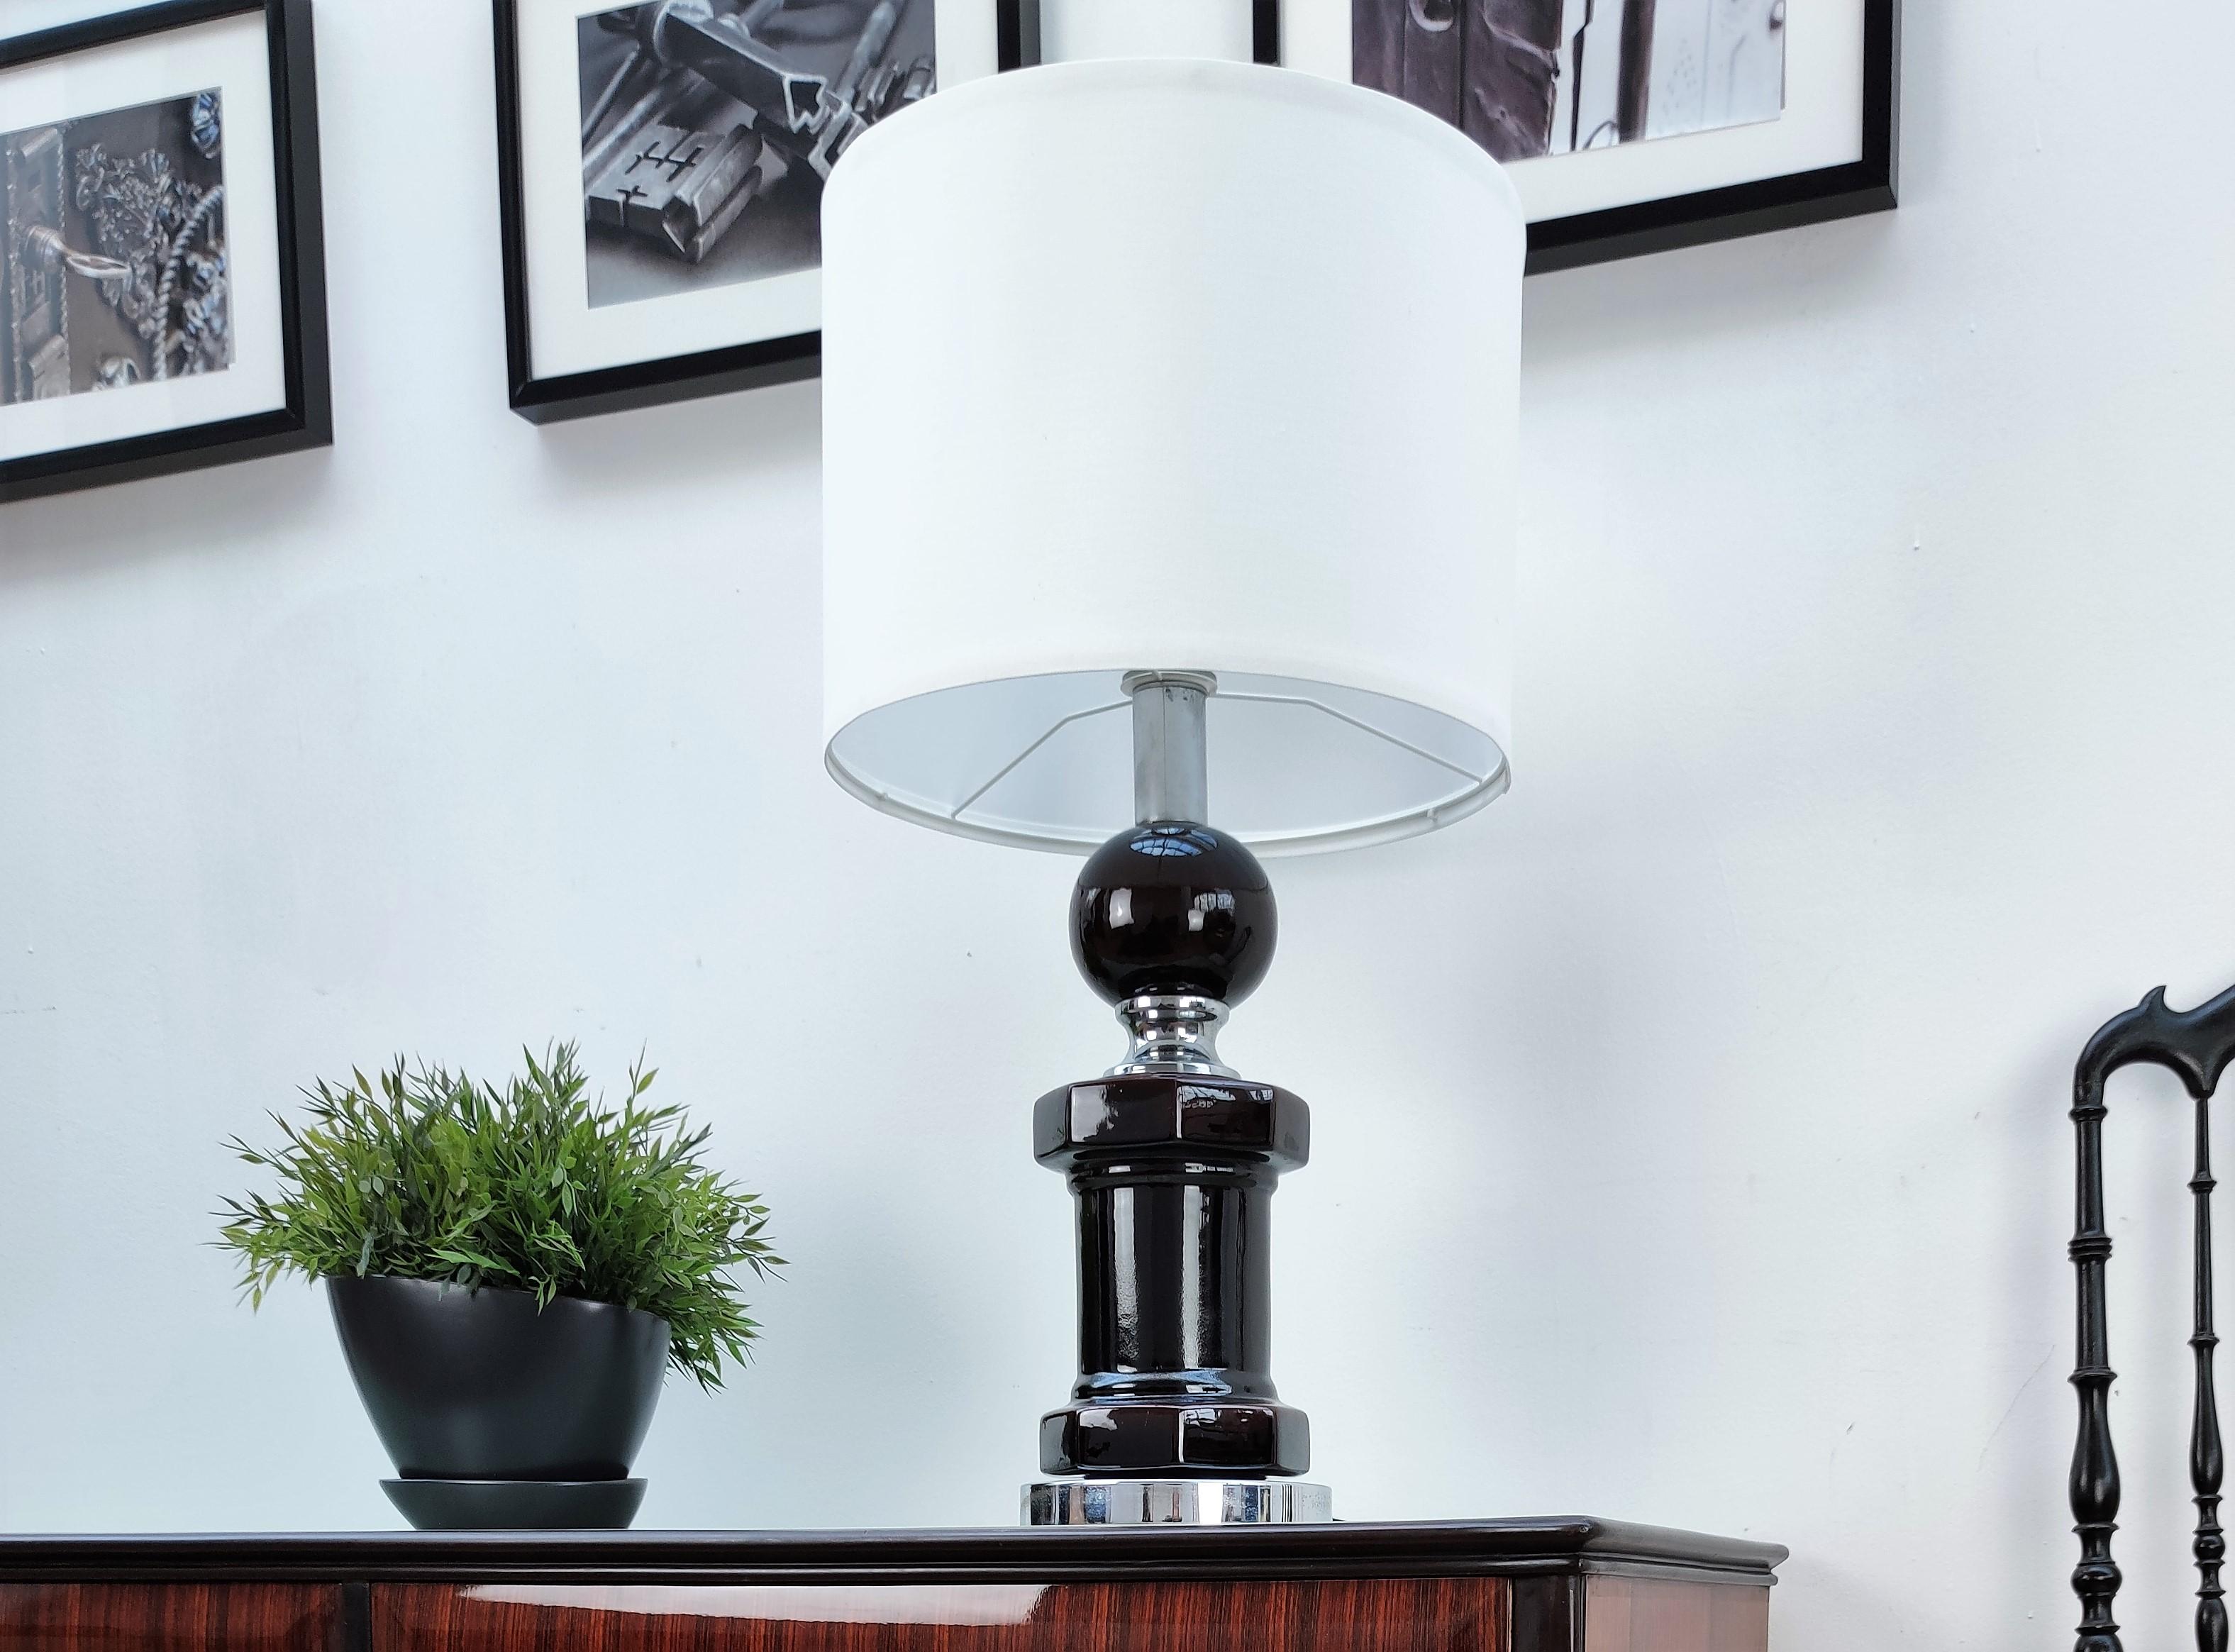 Beautiful Italian Art Deco ceramic and chrome table lamp, ideal on any credenza or sideboard. In typical Art Deco design, being bold, structurally sound and geometric in style, the art deco lights are stylish, timeless, tasteful and classic.